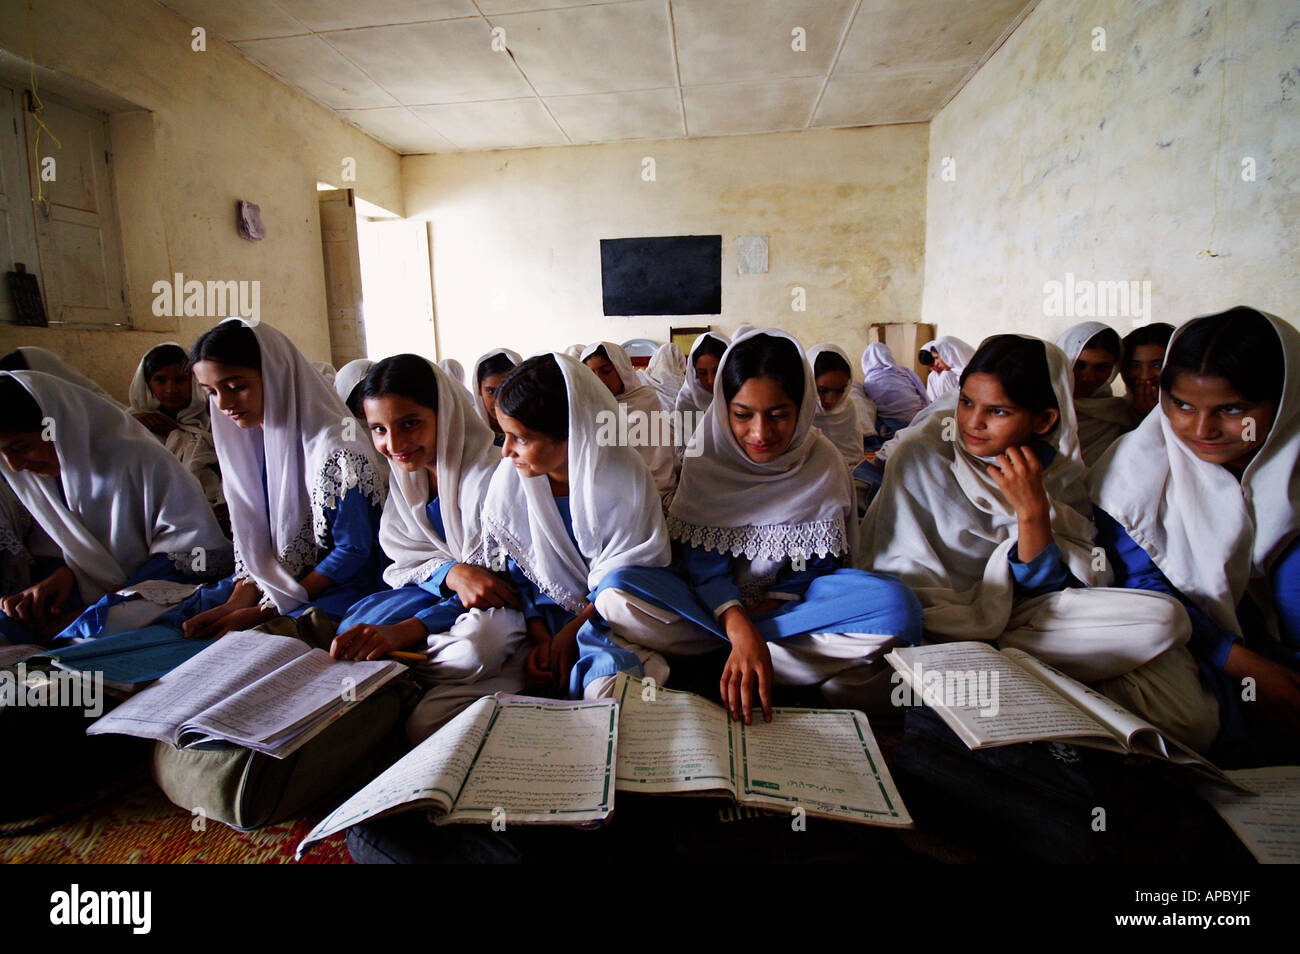 Pakistan School Girls High Resolution Stock Photography and Images - Alamy